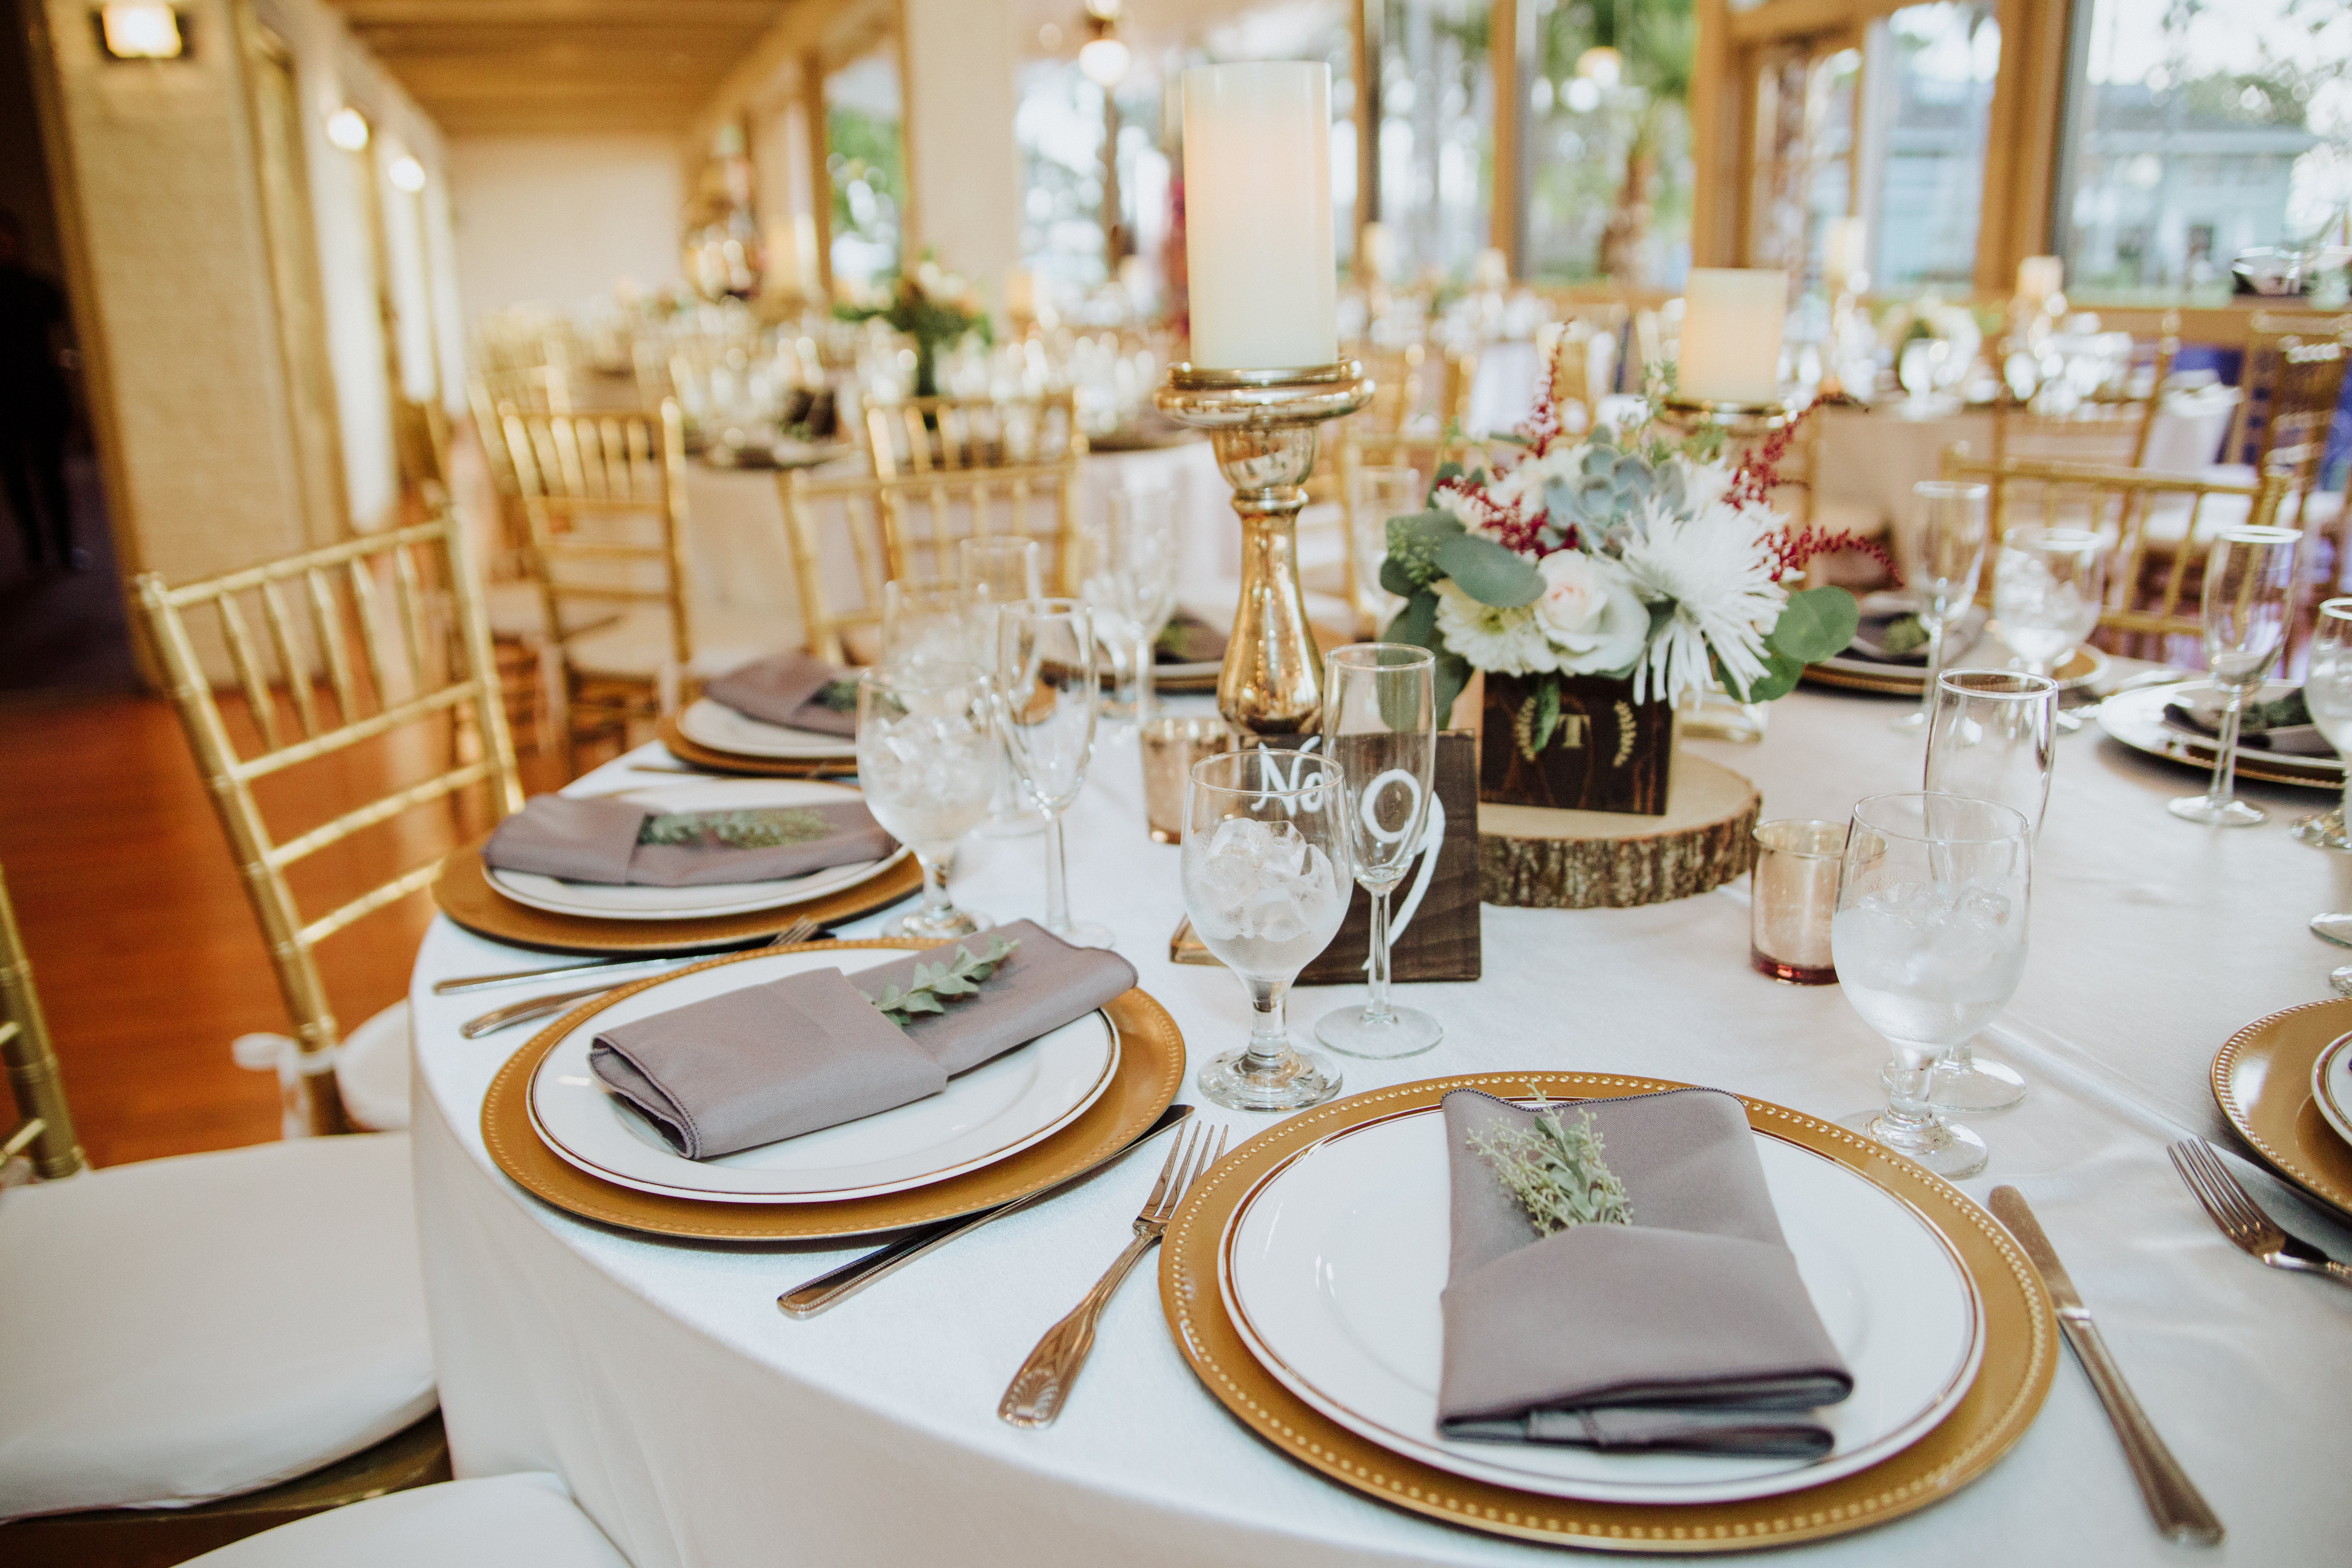 Wedding reception detailsat a Romantic Style San Diego Wedding at Marina Village by Kylie Rae Photography